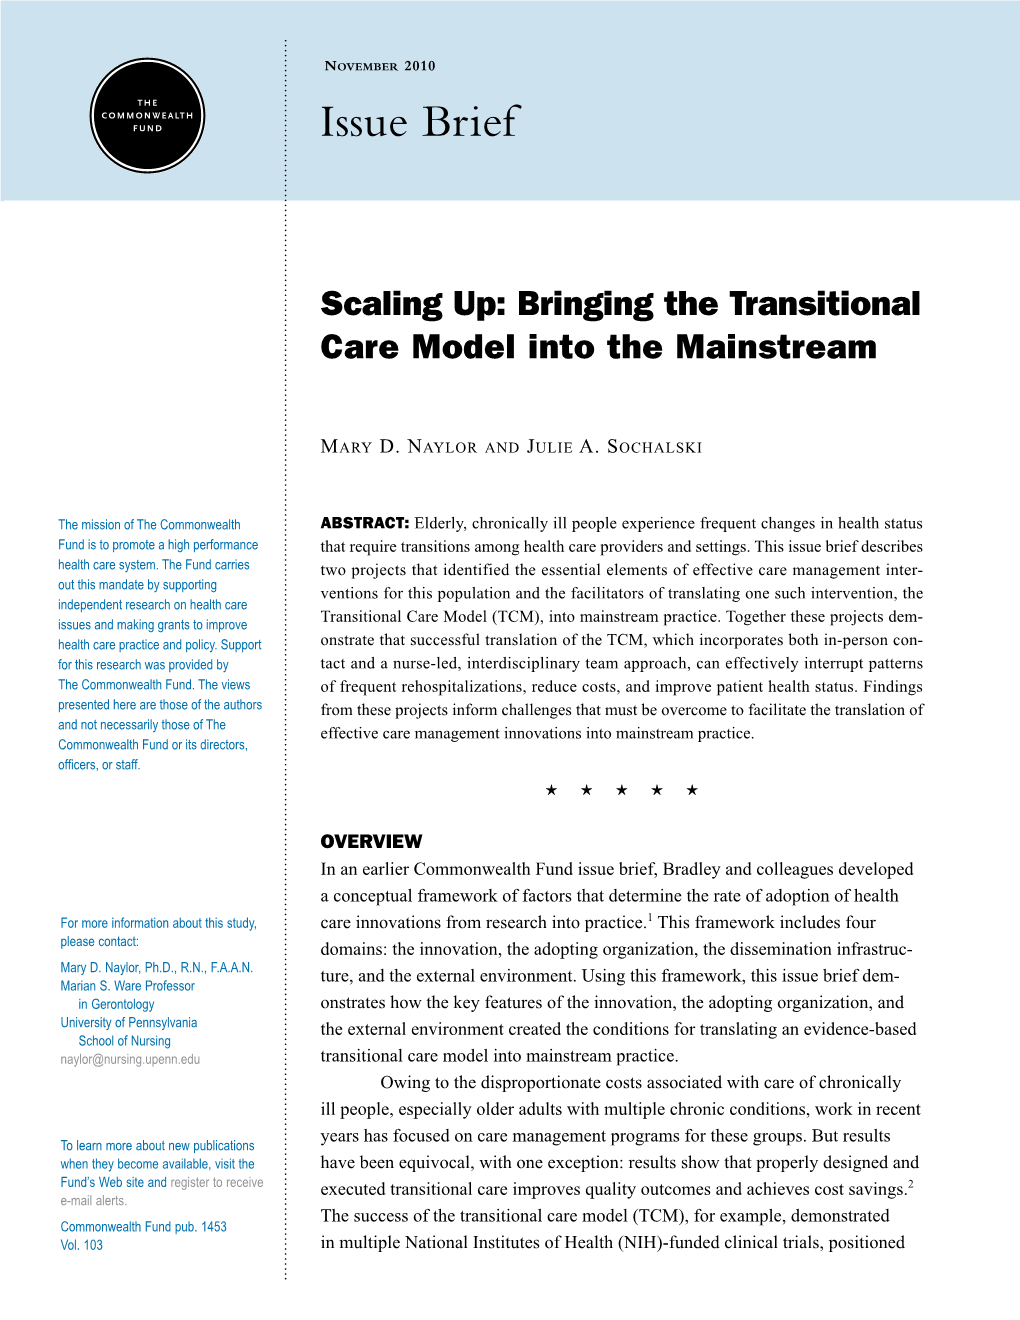 Scaling Up: Bringing the Transitional Care Model Into the Mainstream